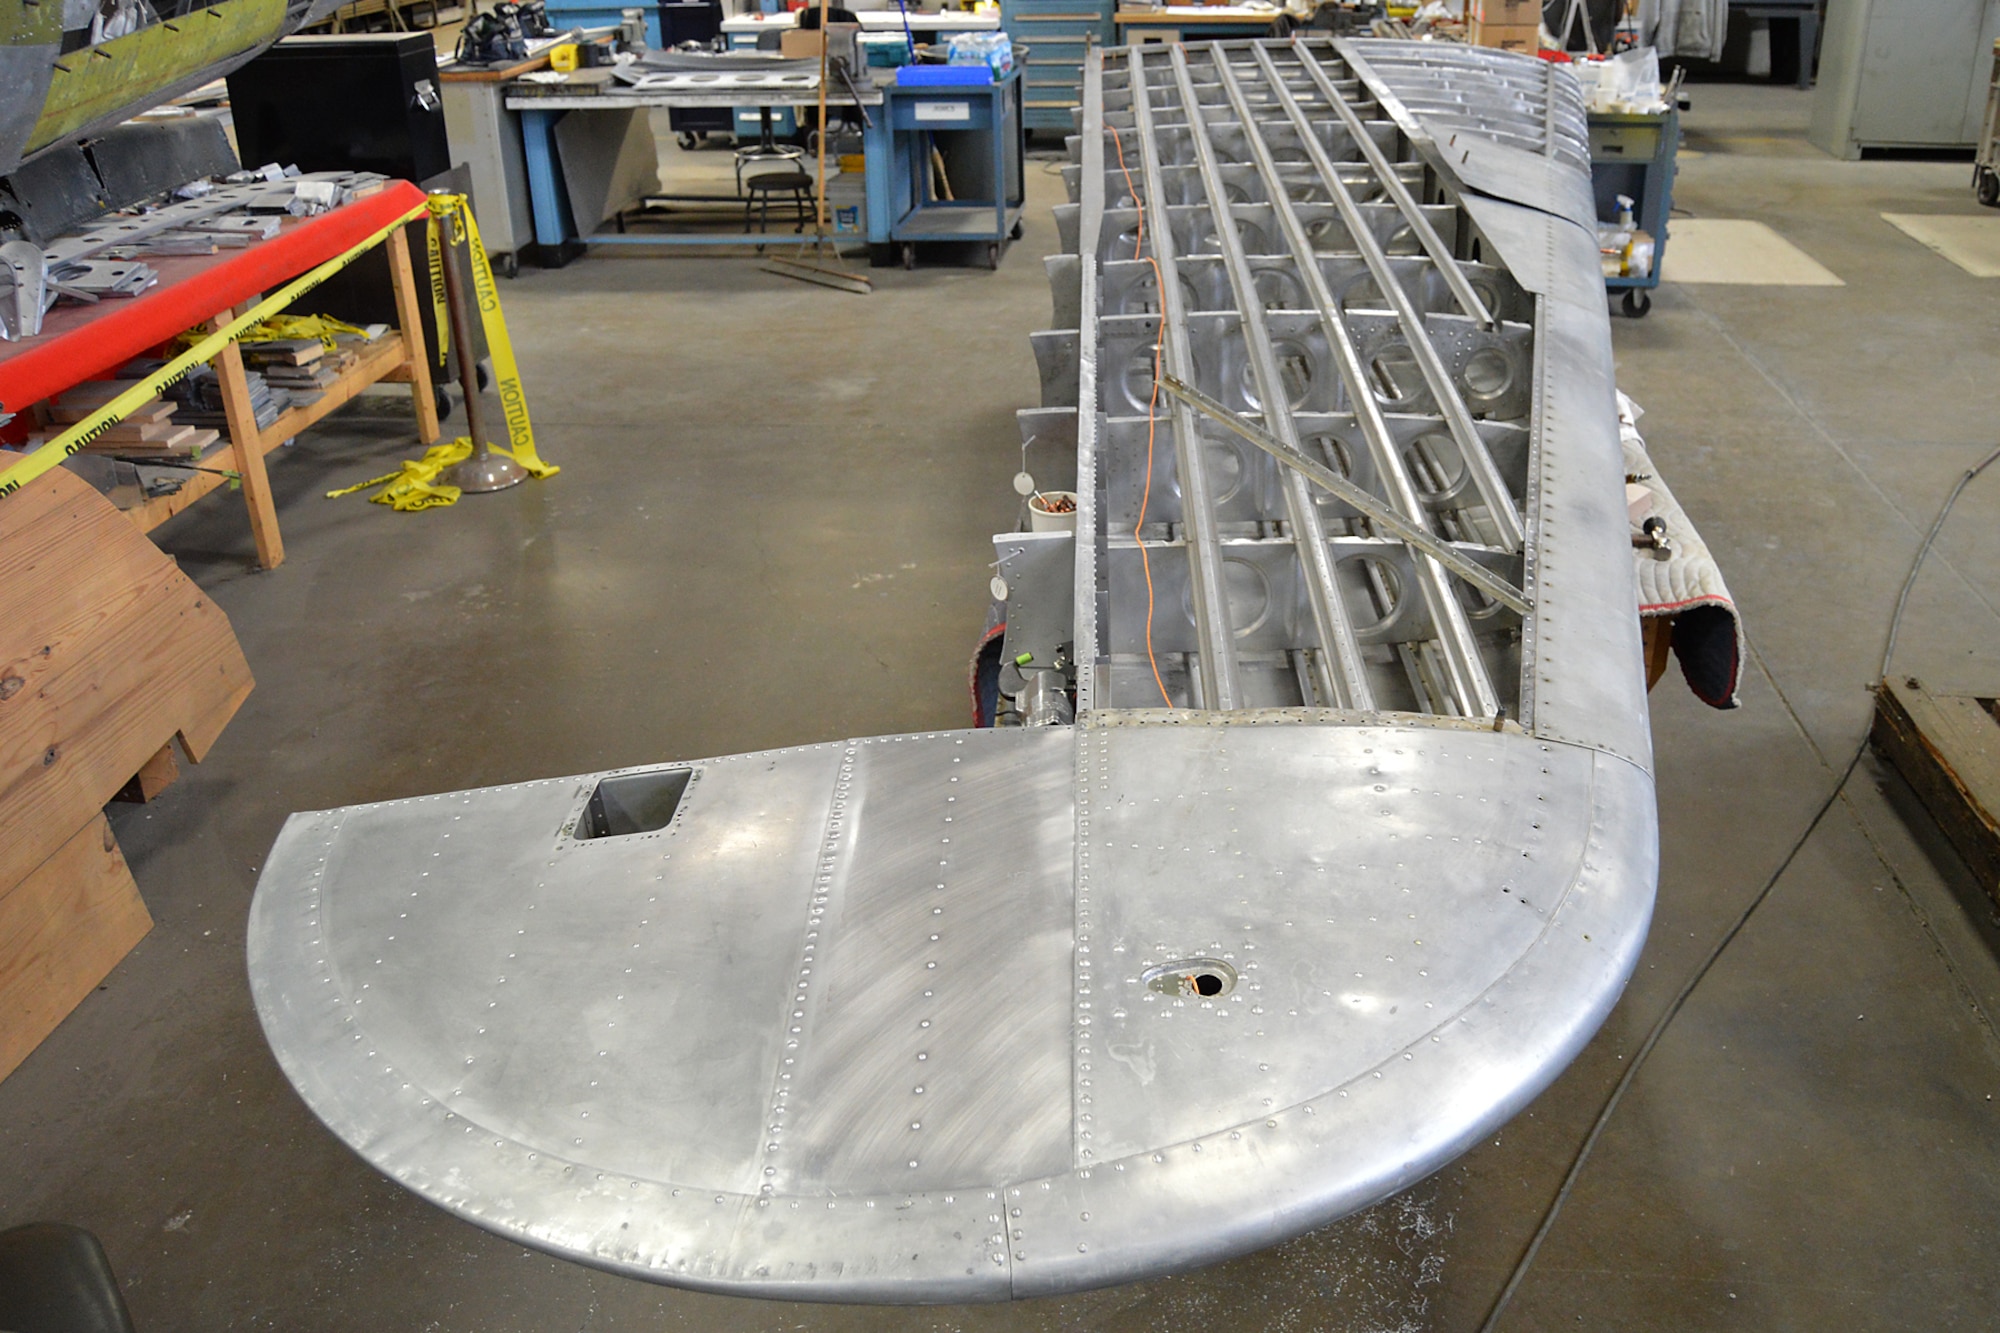 DAYTON, Ohio (12/2014) -- A horizontal stabilizer of the B-17F "Memphis Belle" in the restoration hangar at the National Museum of the United States Air Force. (U.S. Air Force photo)
